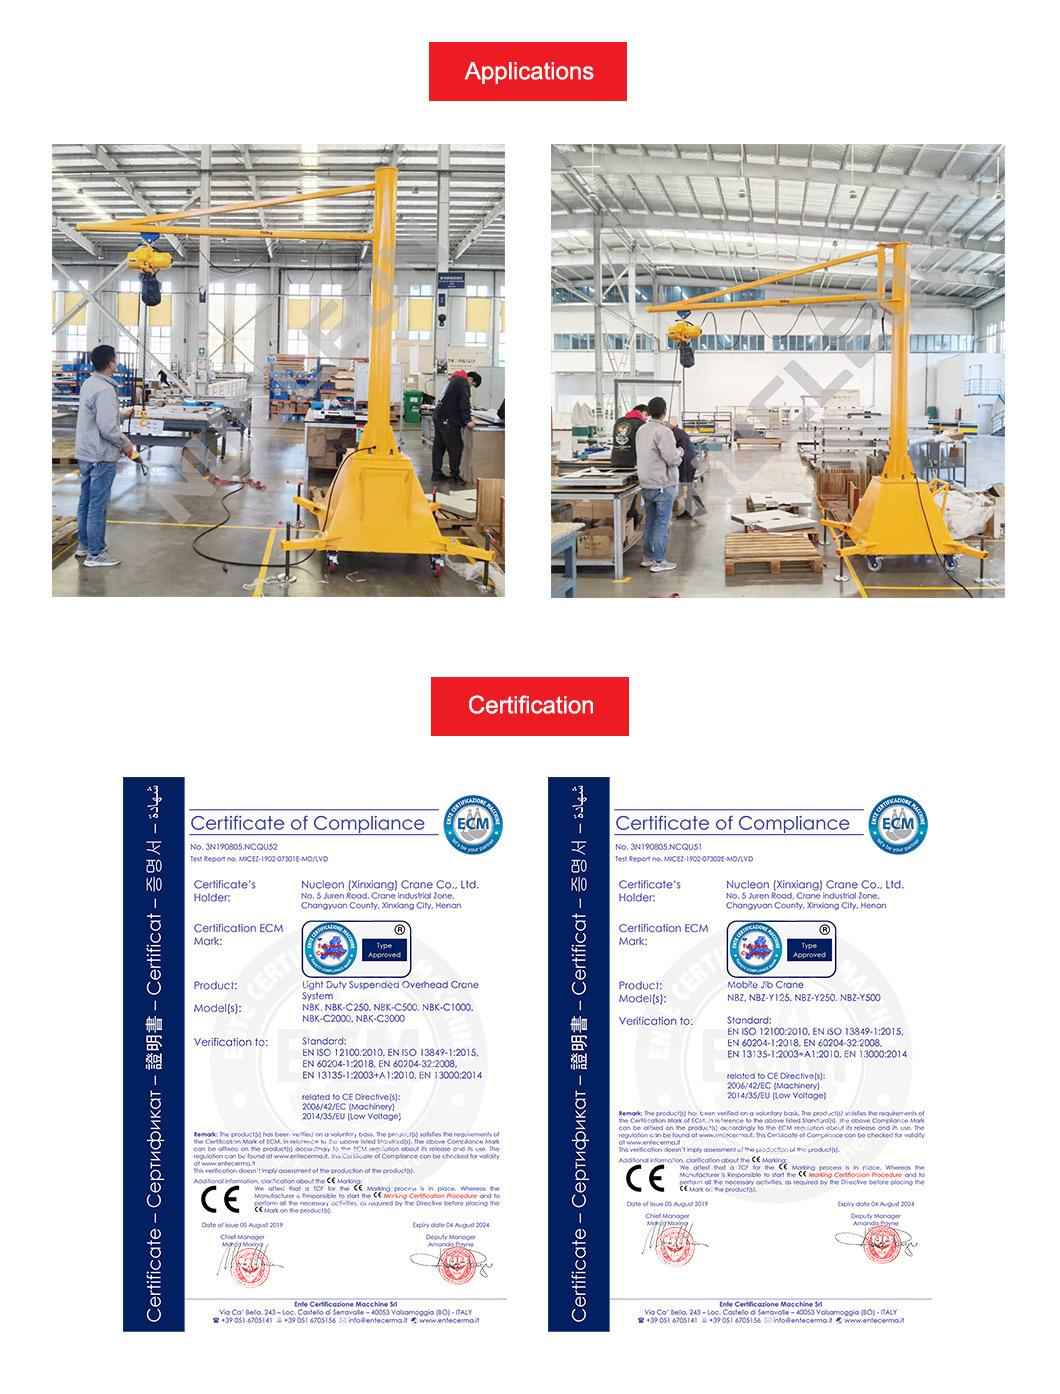 CE Certified 300kg Portable Jib Crane Free Moving on Caster Wheels